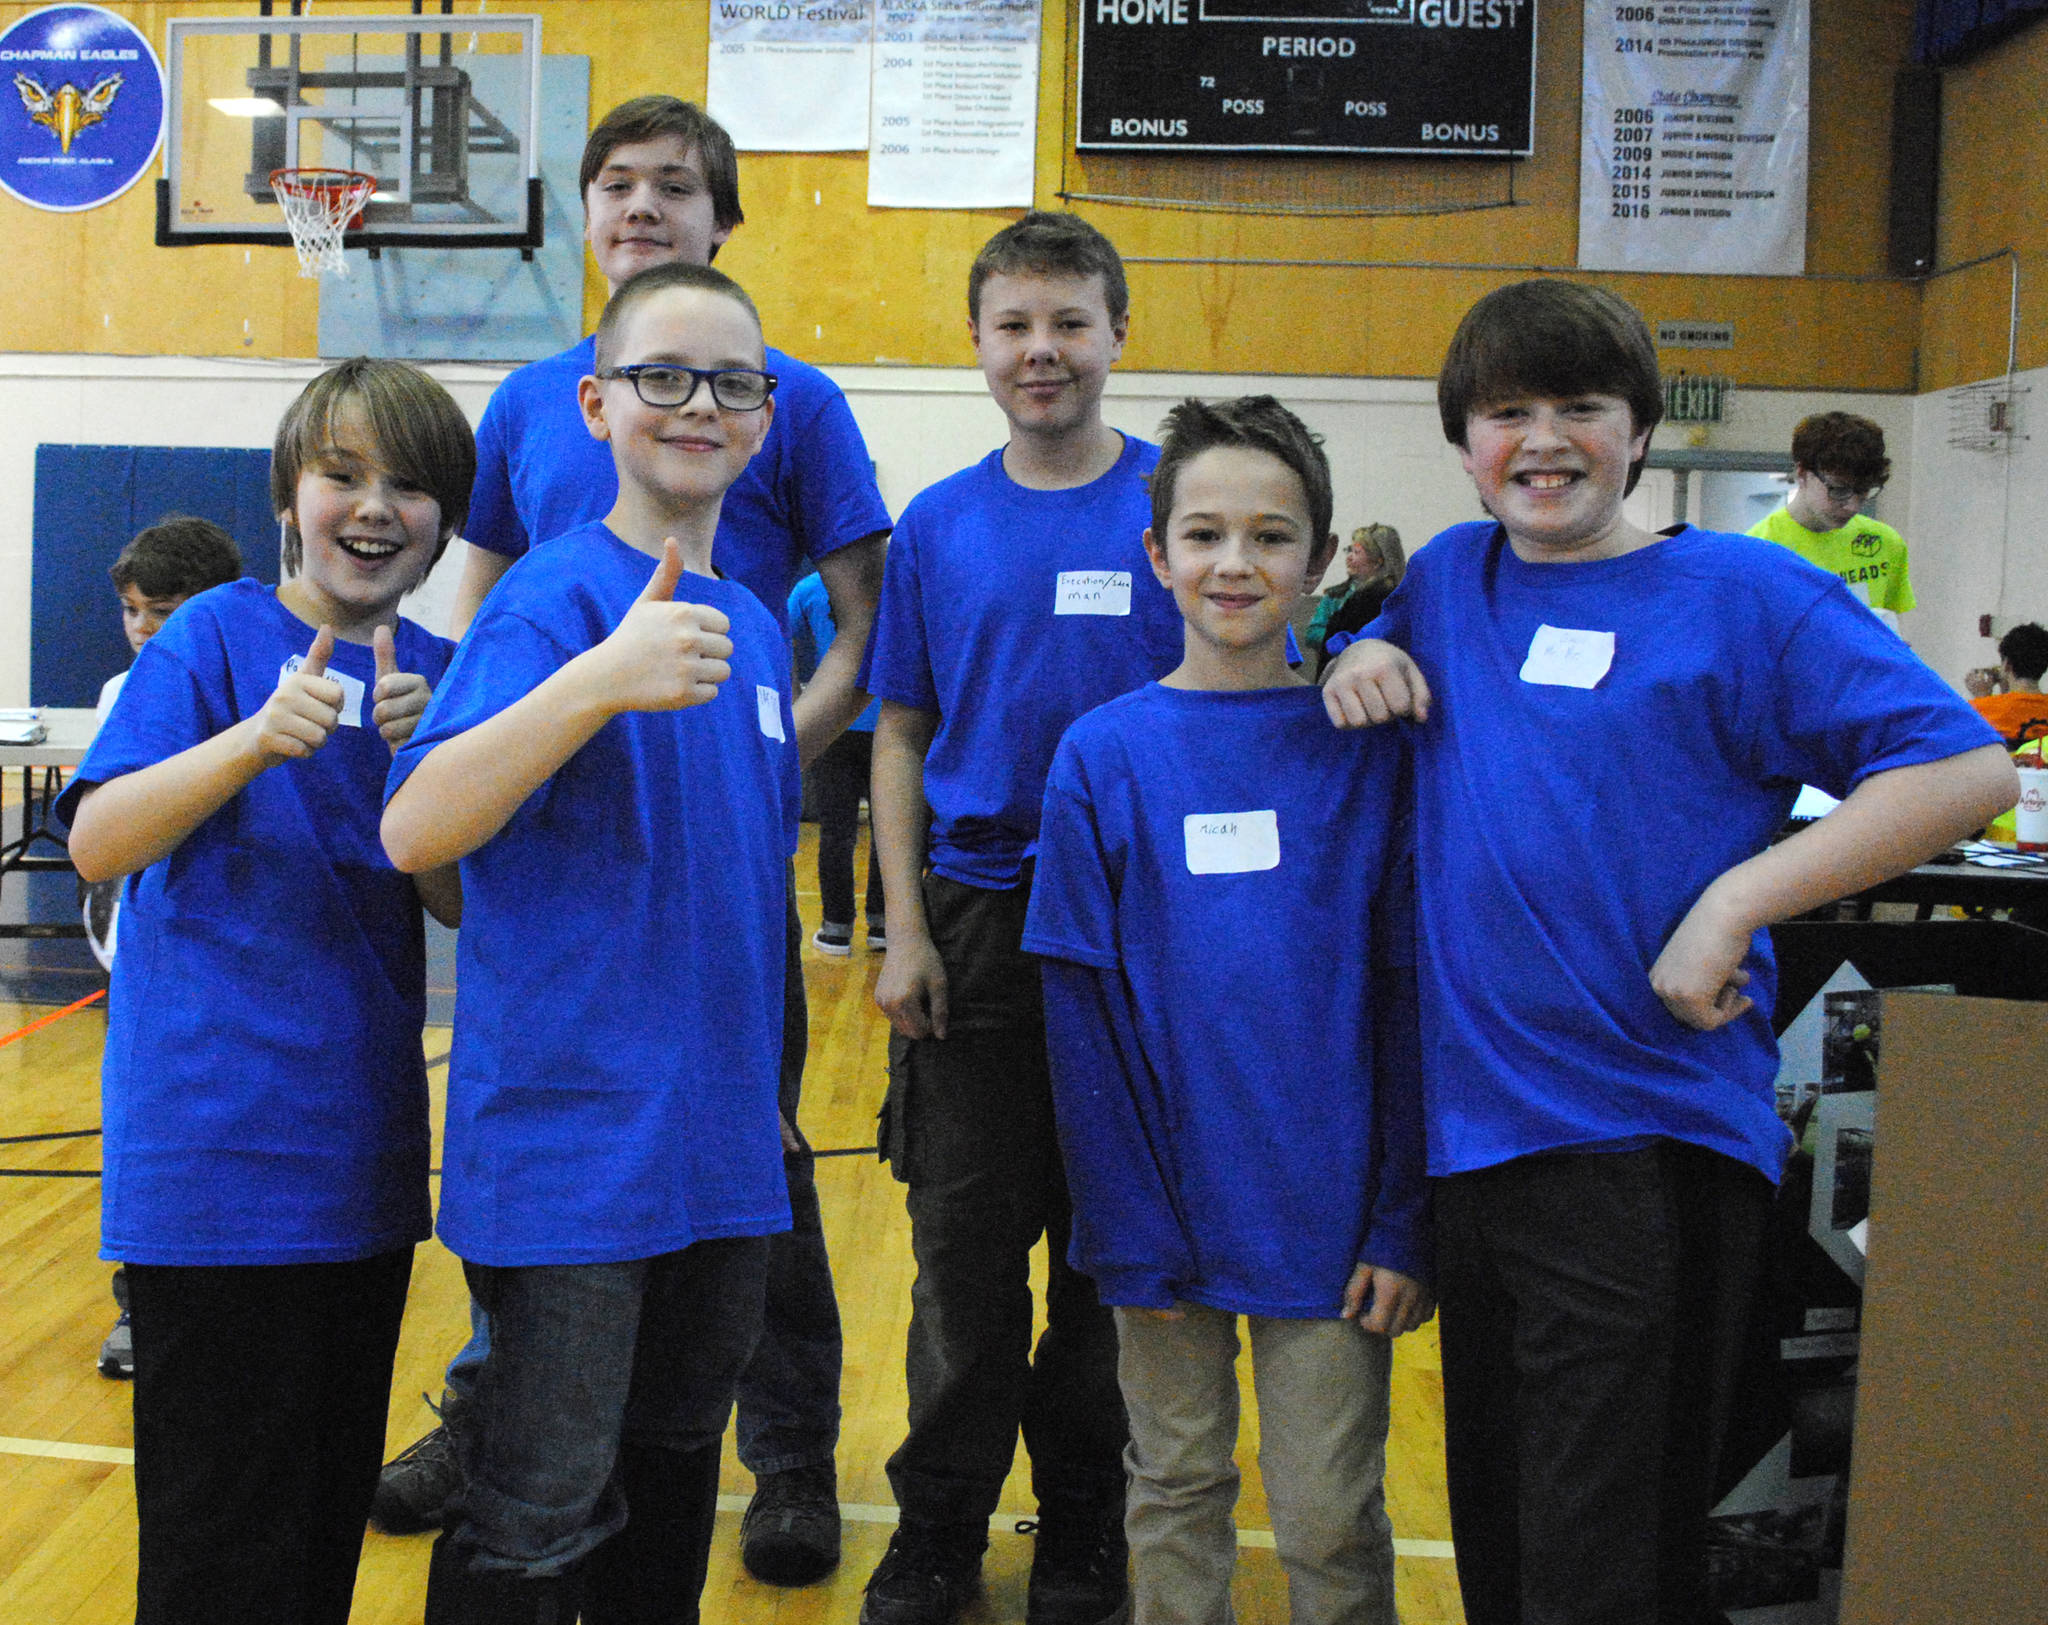 The Kenai home school team ‘Aqua Intelligence’ won top prize for core values on Saturday at the First Lego League competition held at the Aurora Borealis Charter School in Kenai. The event recognized awards in five categories. The champion’s award, project award, core values award, robot design award and robot performance award. The core values award recognizes a team that excels in inspiration, teamwork and gracious professionalism. The ‘Aqua Intelligence’ team showed “extraordinary enthusiasm and spirit” and understand that they can “accomplish more together than they could as individuals.” (Photo by Kat Sorensen/ Peninsula Clarion)